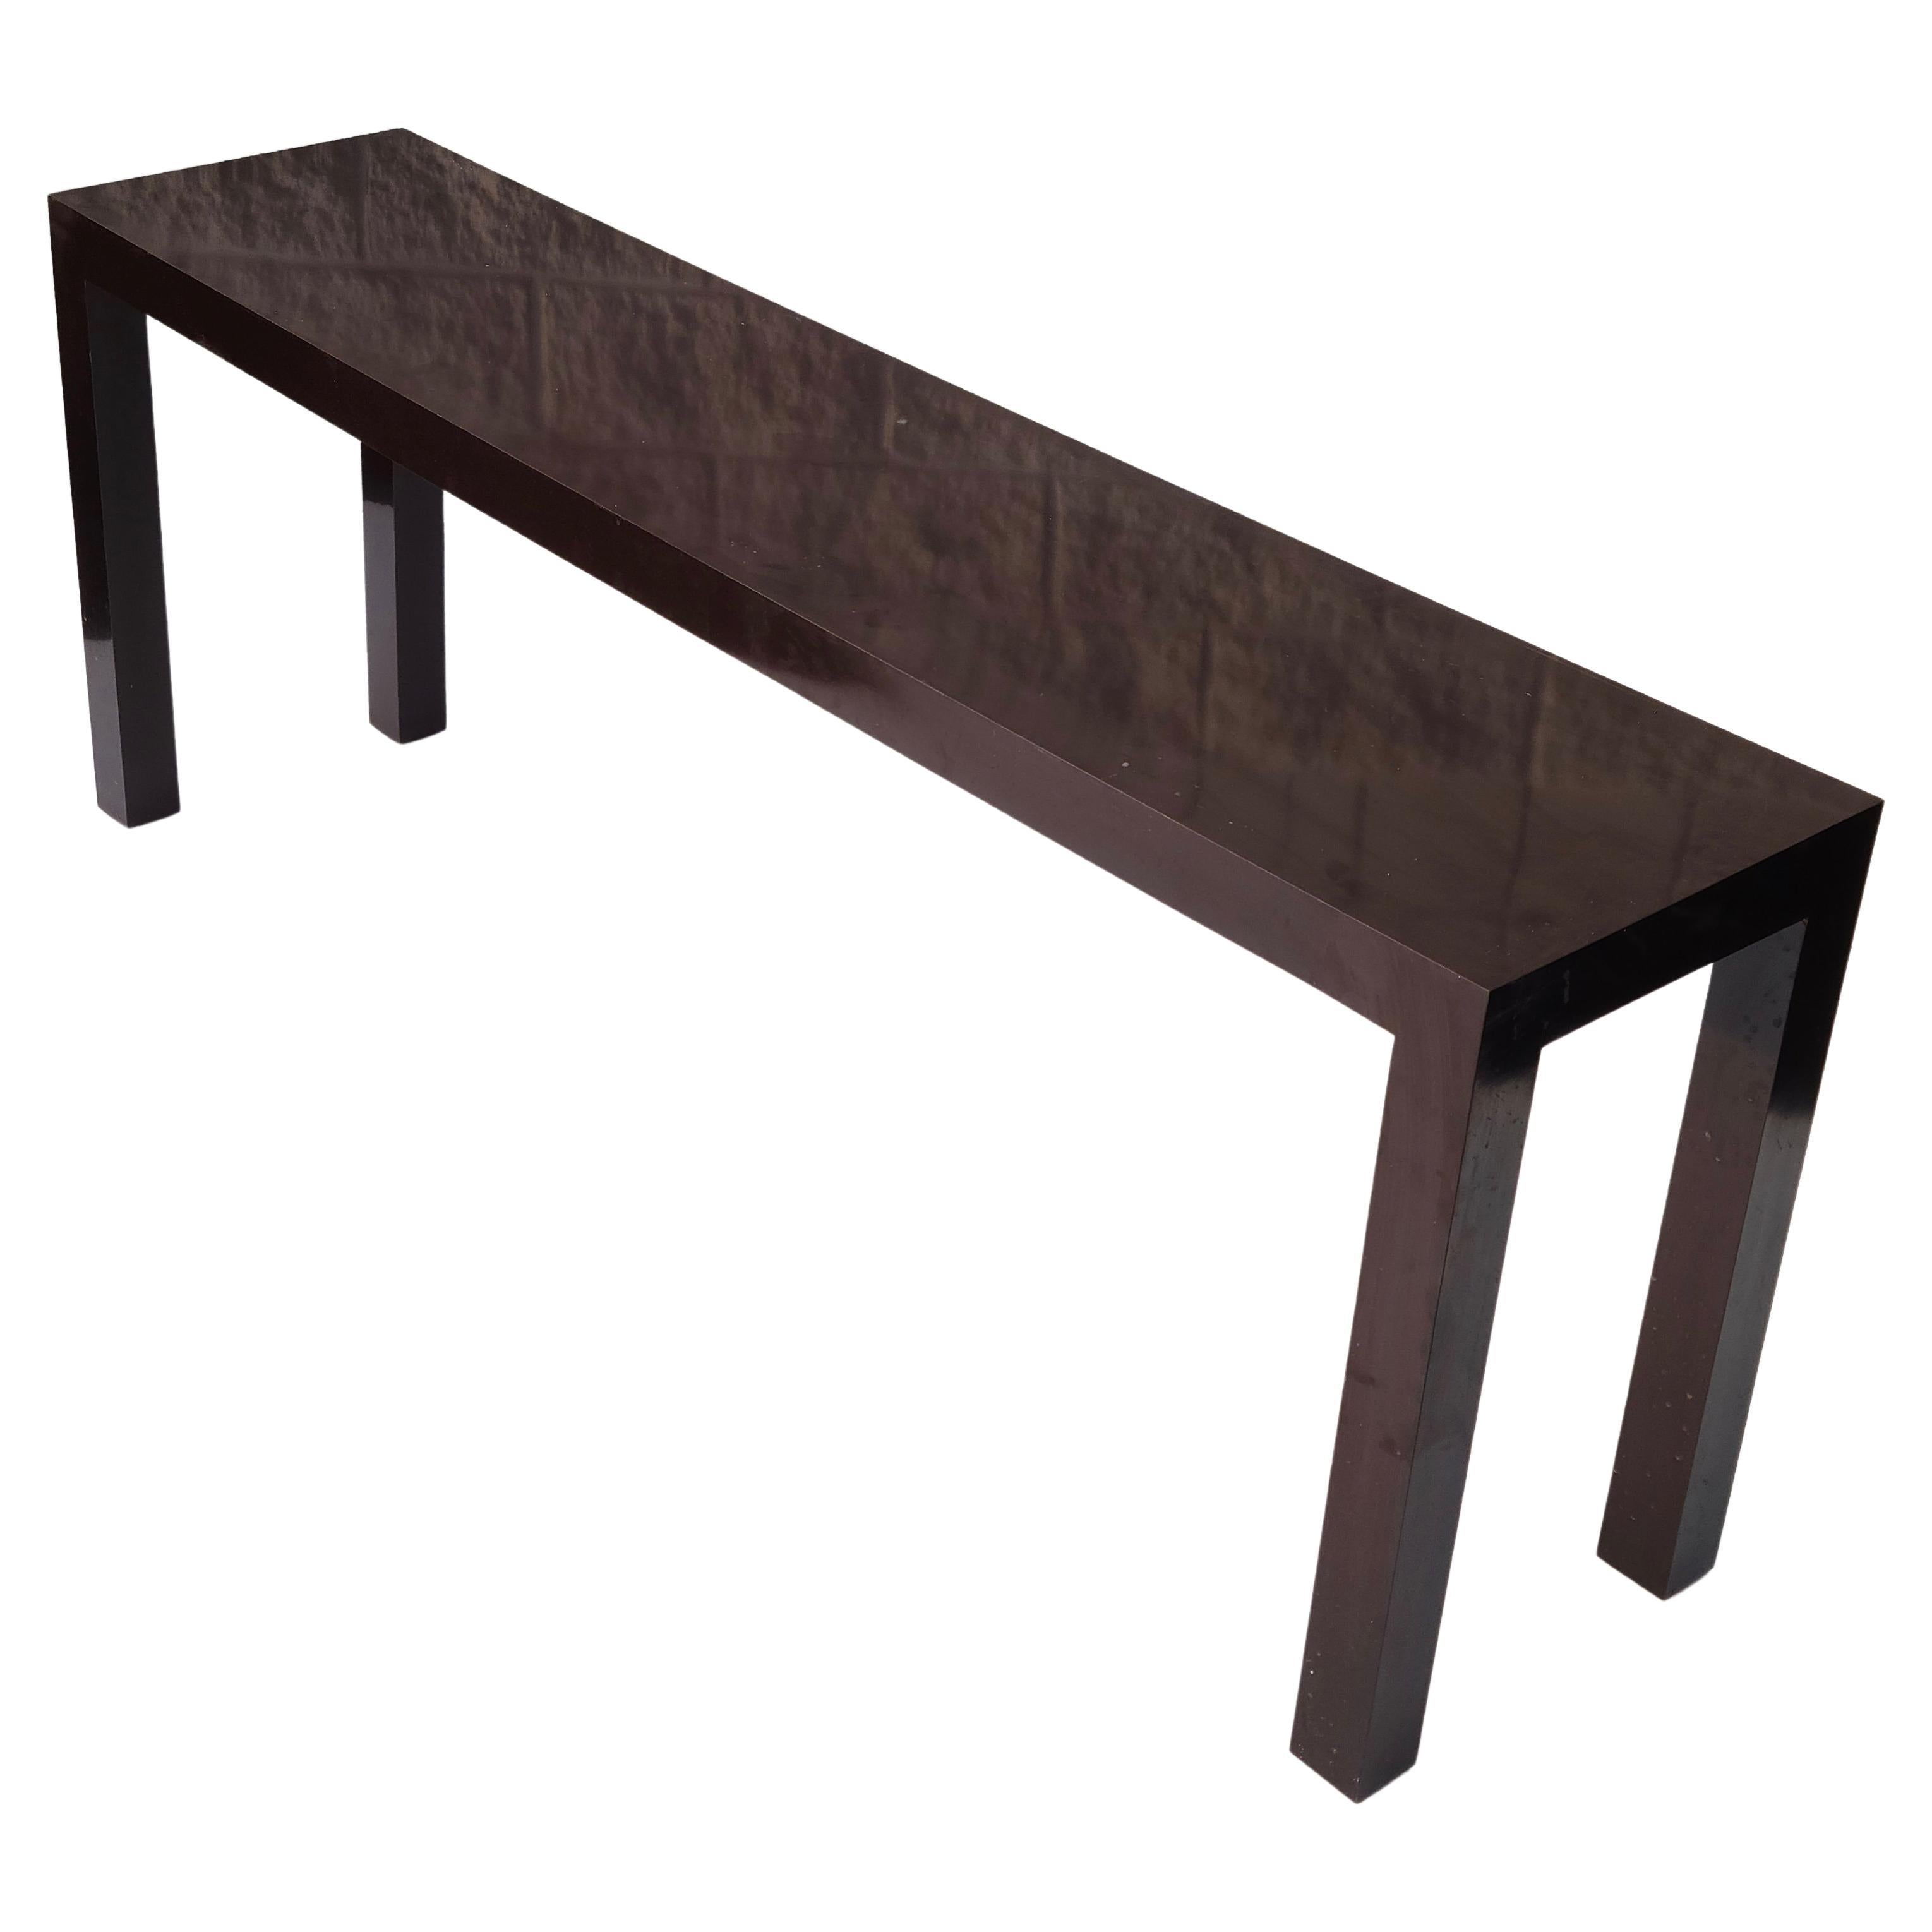 Please feel free to message for accurate shipping to your location.

Console table designed by Milo Baughman for Thayer Coggin. Plastic applique' with deep brown color. 
Table constructed of wood with thin plastic outer surface.